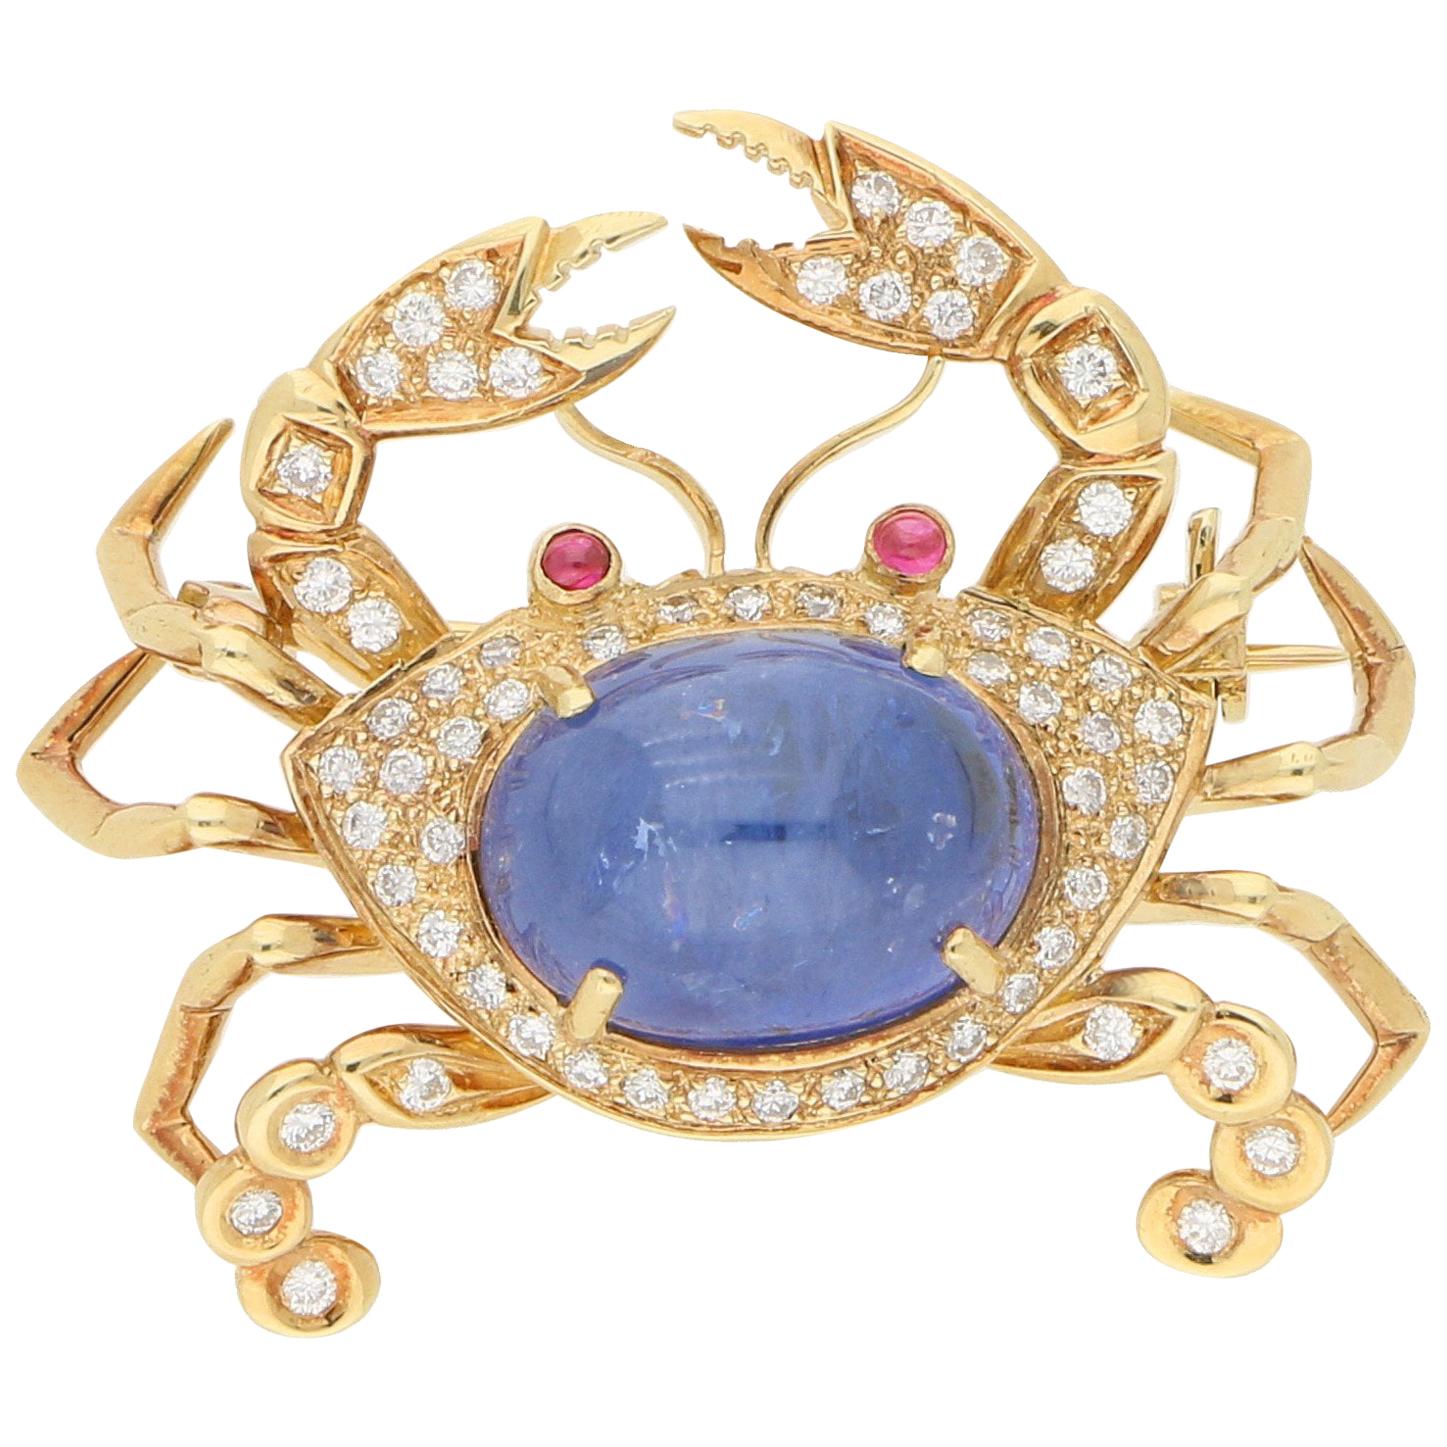 7 Carat Sapphire, Diamond and Ruby Crab Pin Brooch in Yellow Gold